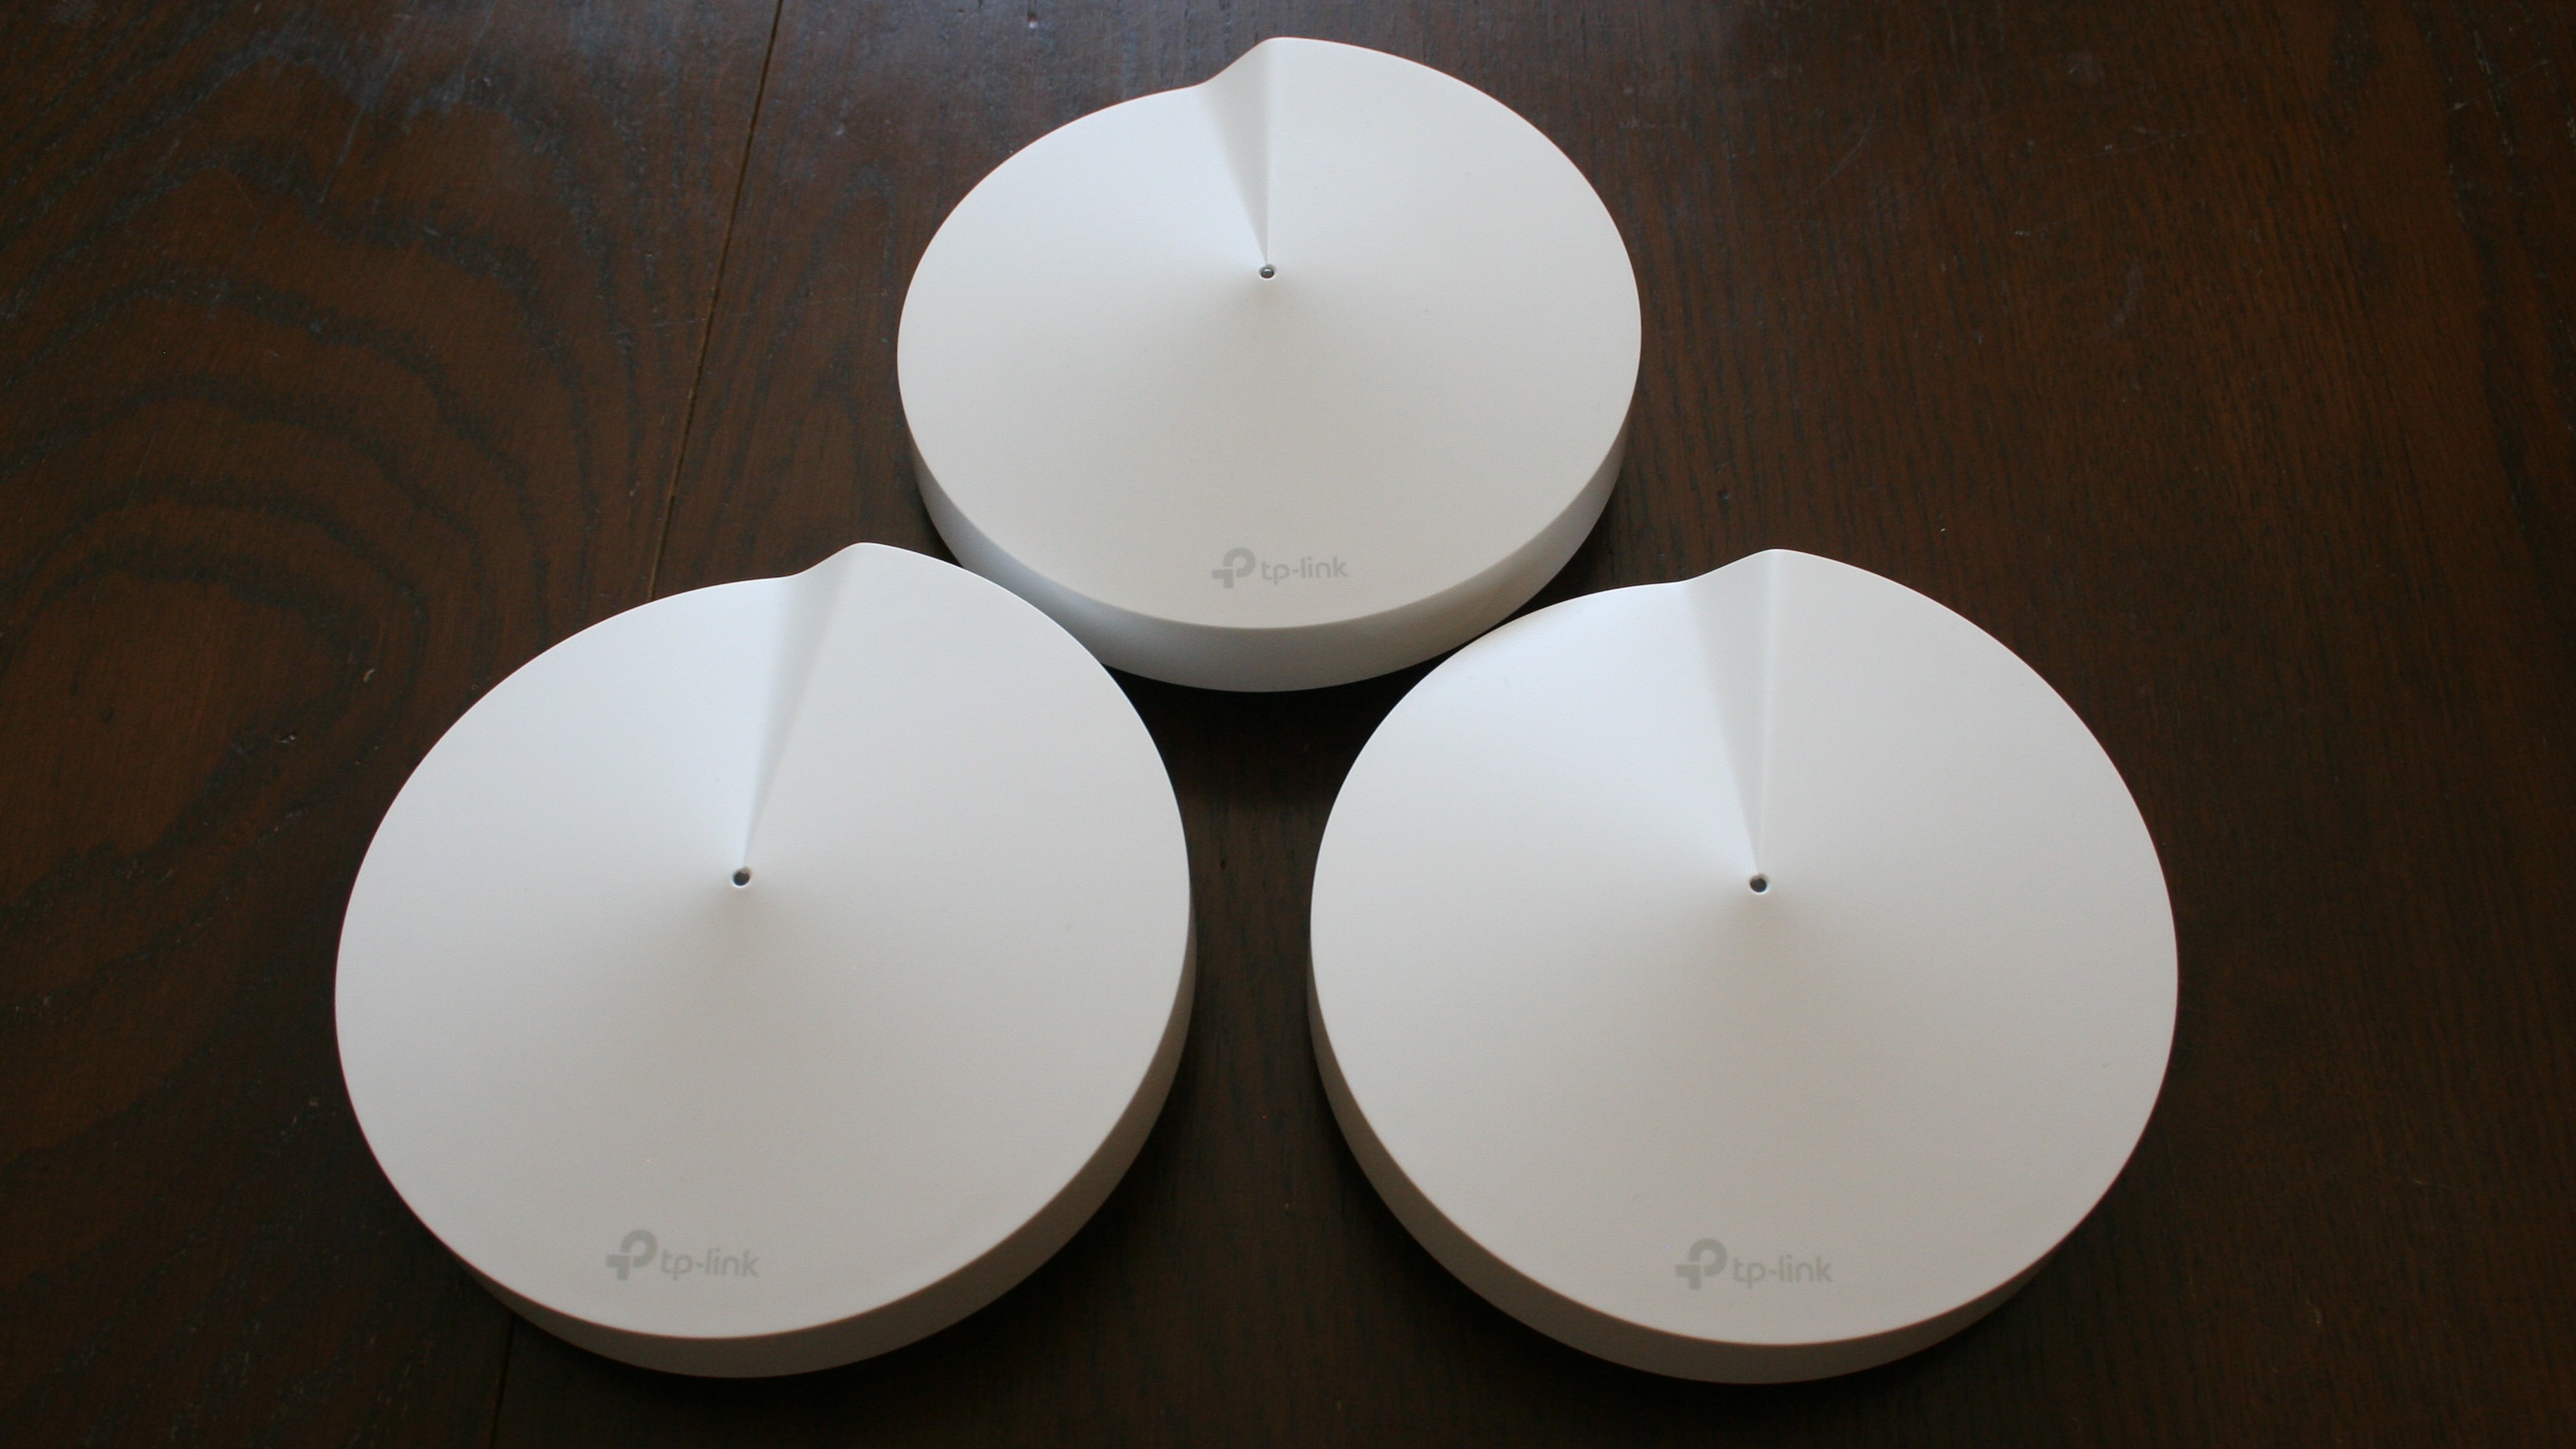 Best wireless mesh routers 